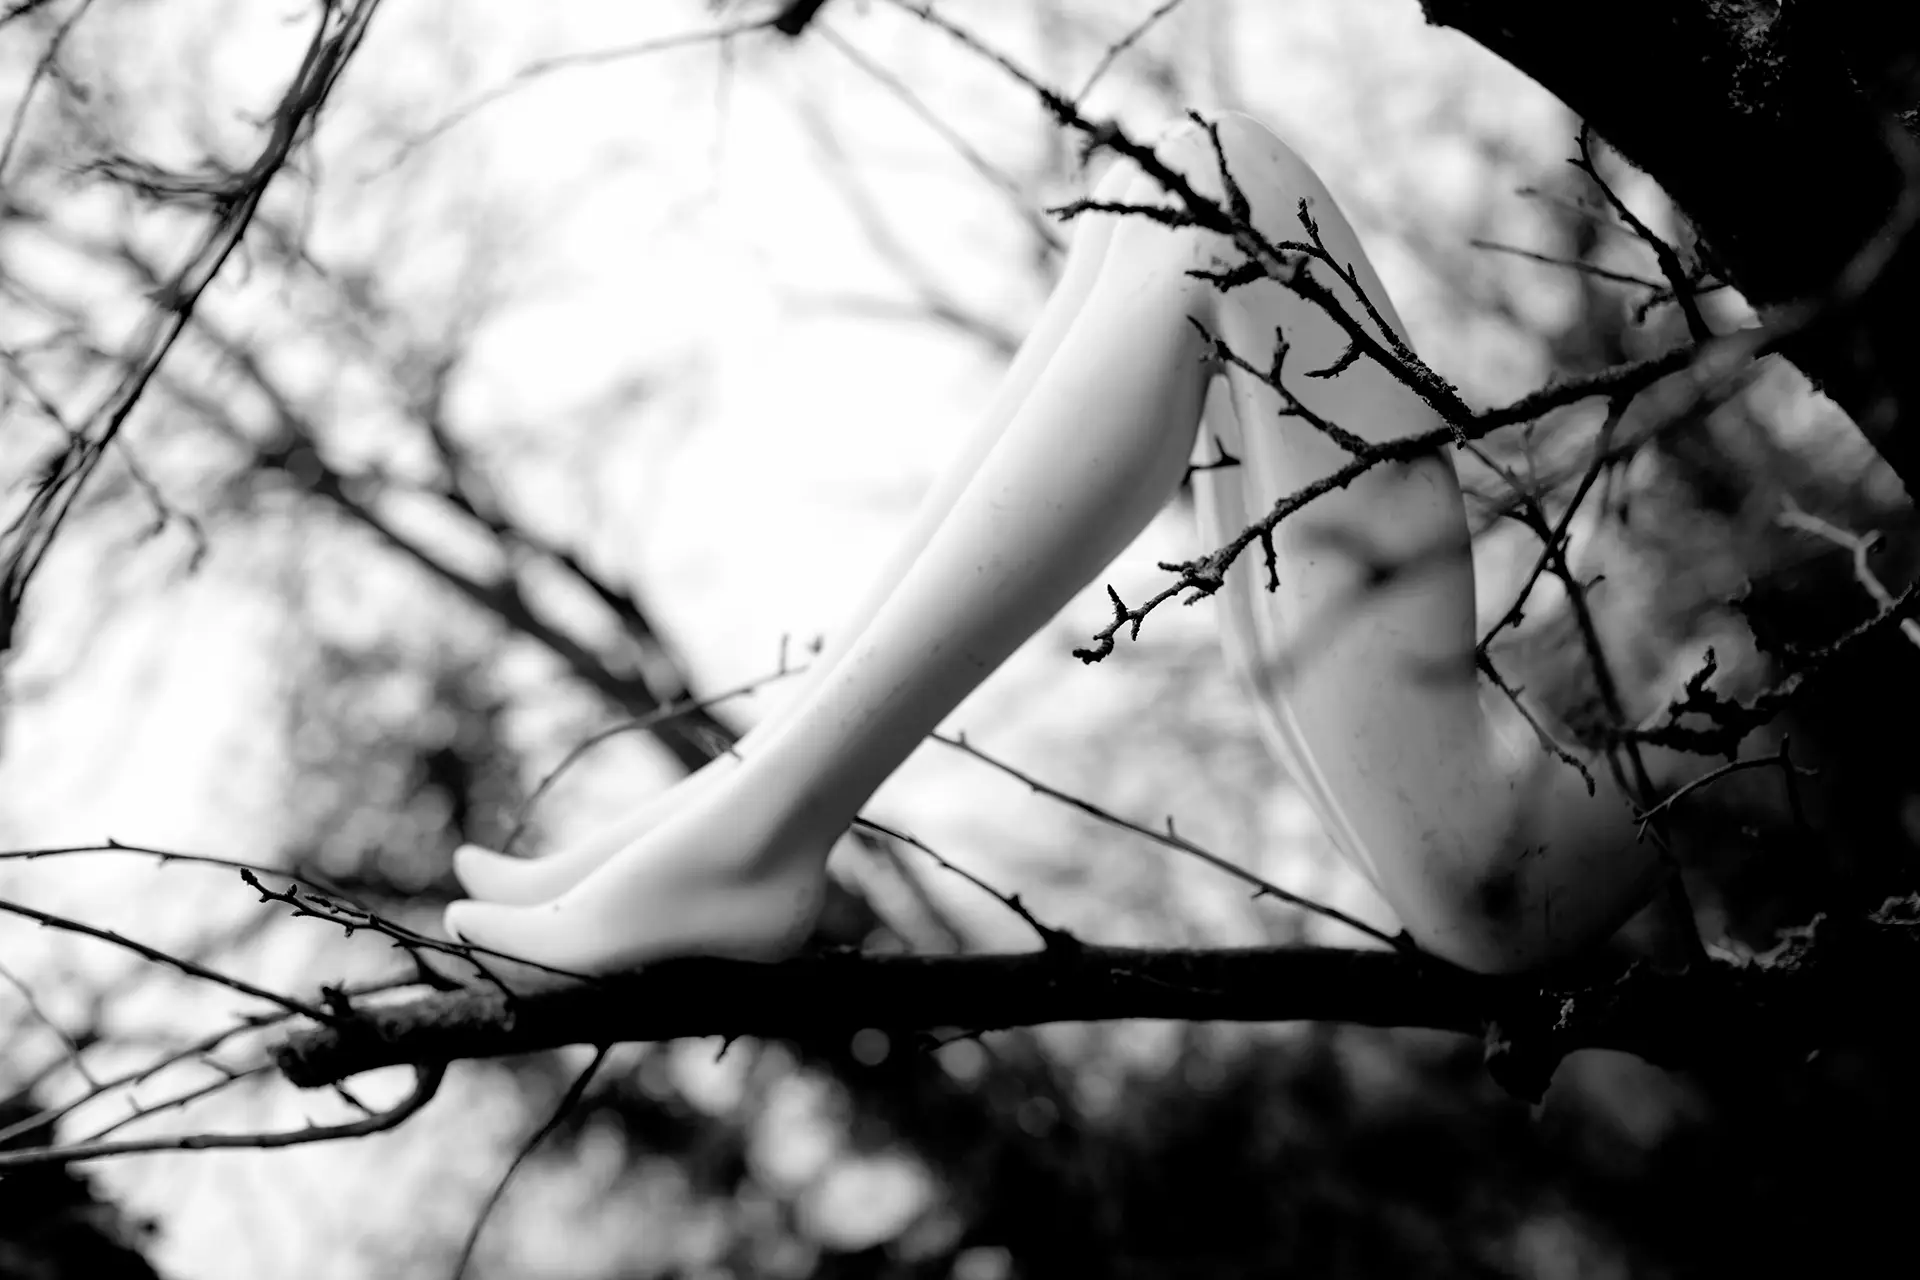 Mannequin legs in a forest. Series entitled The nature of all things by artist Julianne Rose